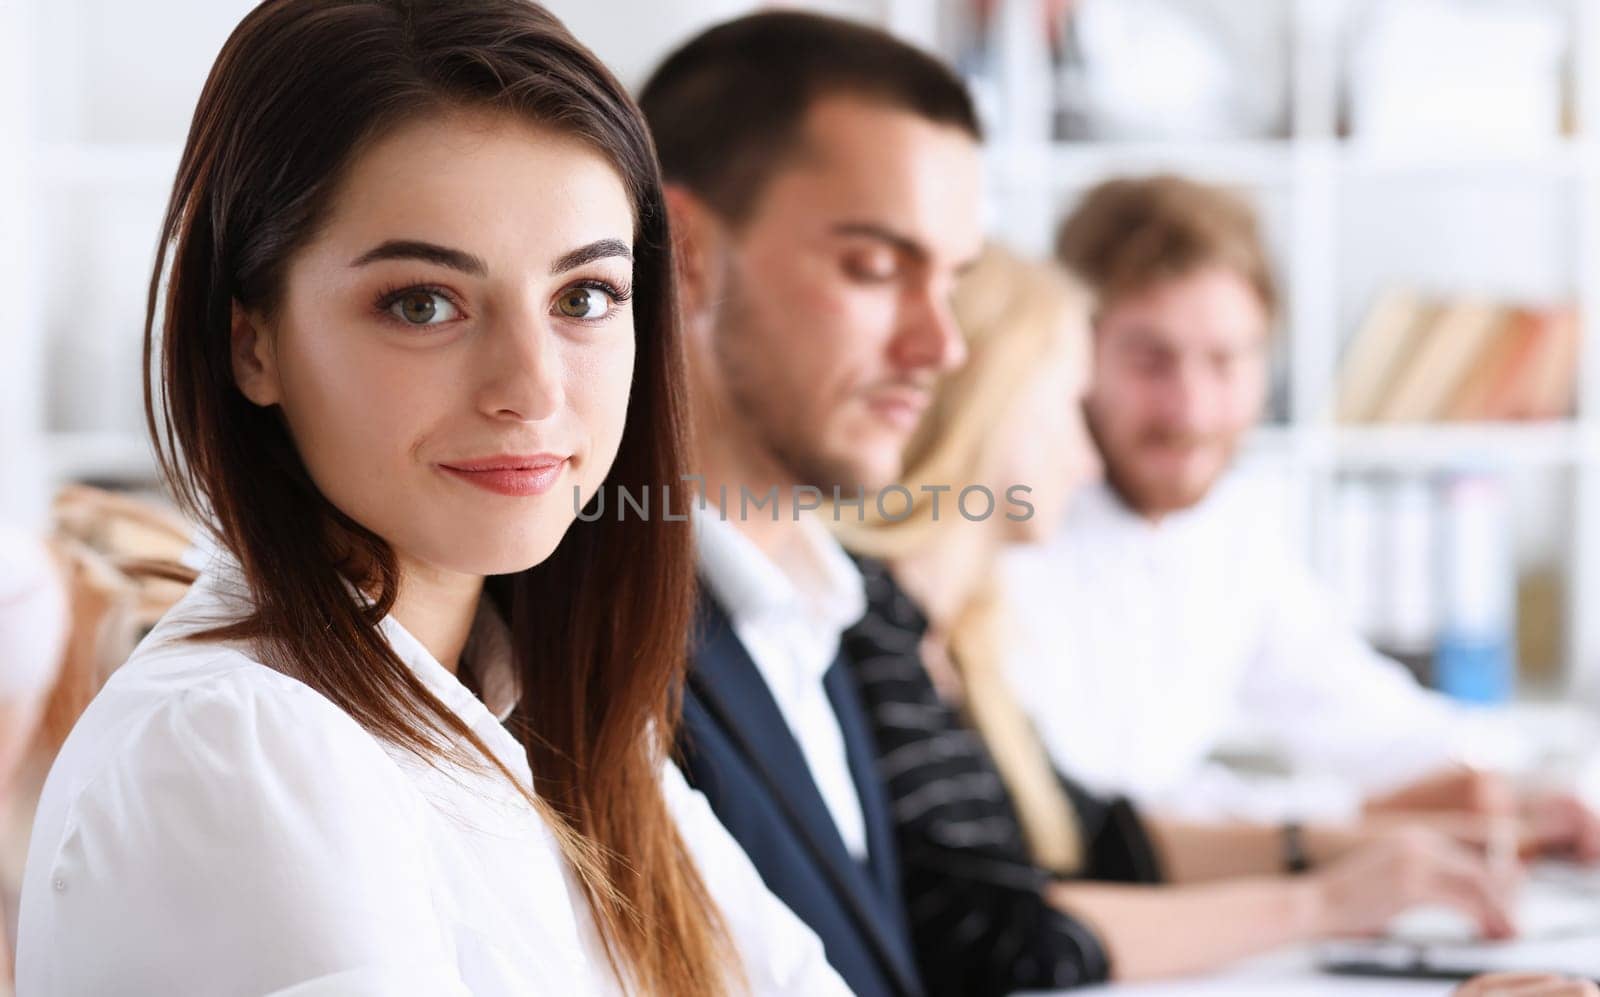 Beautiful smiling woman portrait with group of people listen carefully during seminar. Study event client conversation job customer support service case hear in court leader performance concept